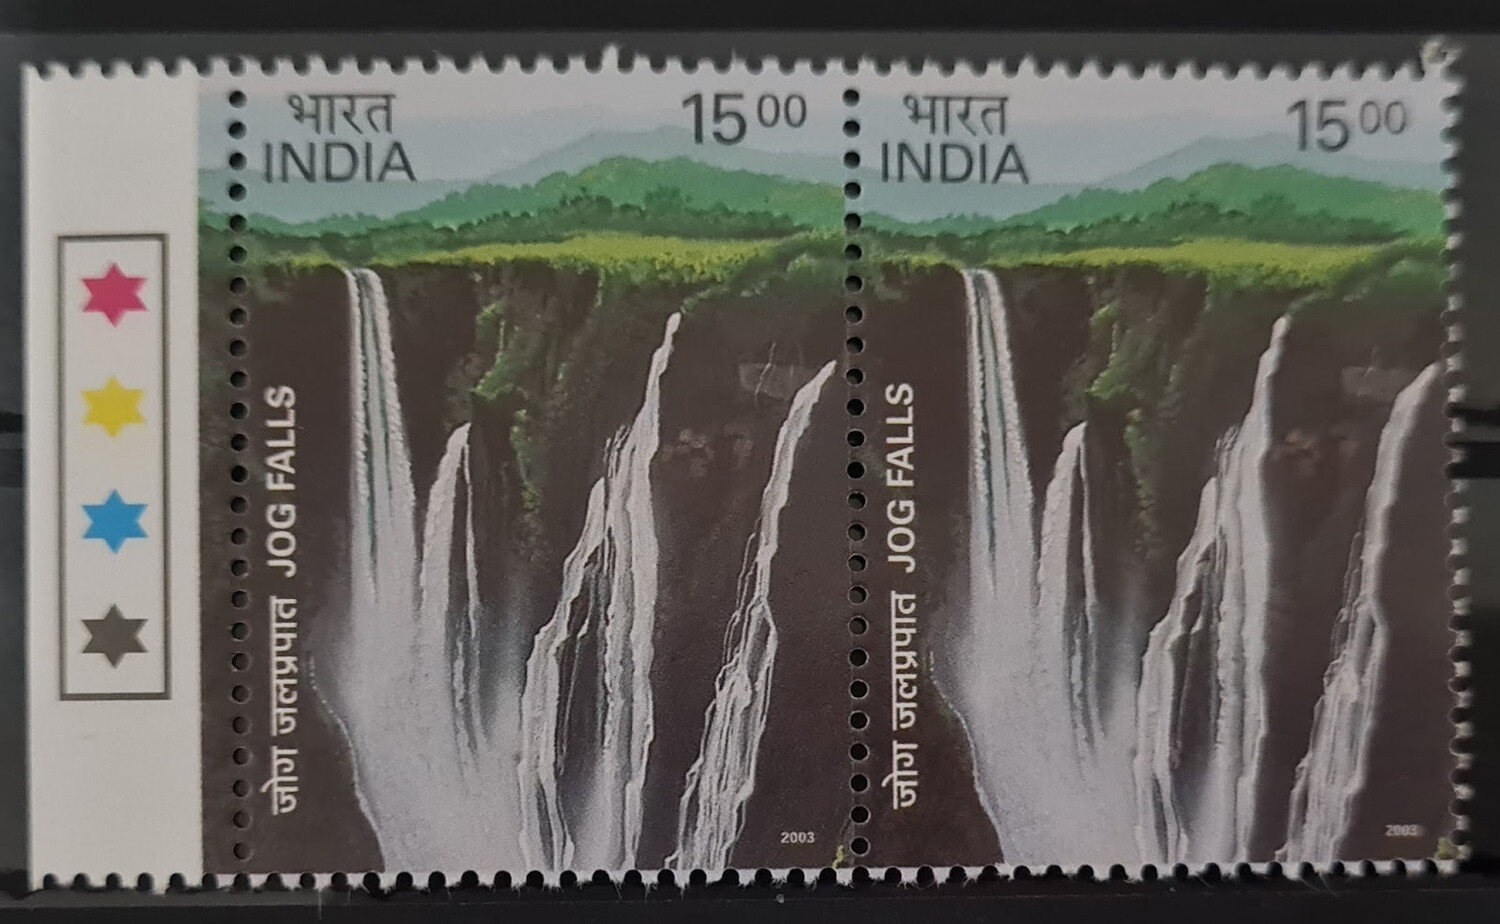 INDIA-JOG FALLS 2003 MNH pair of stamps with traffic lights